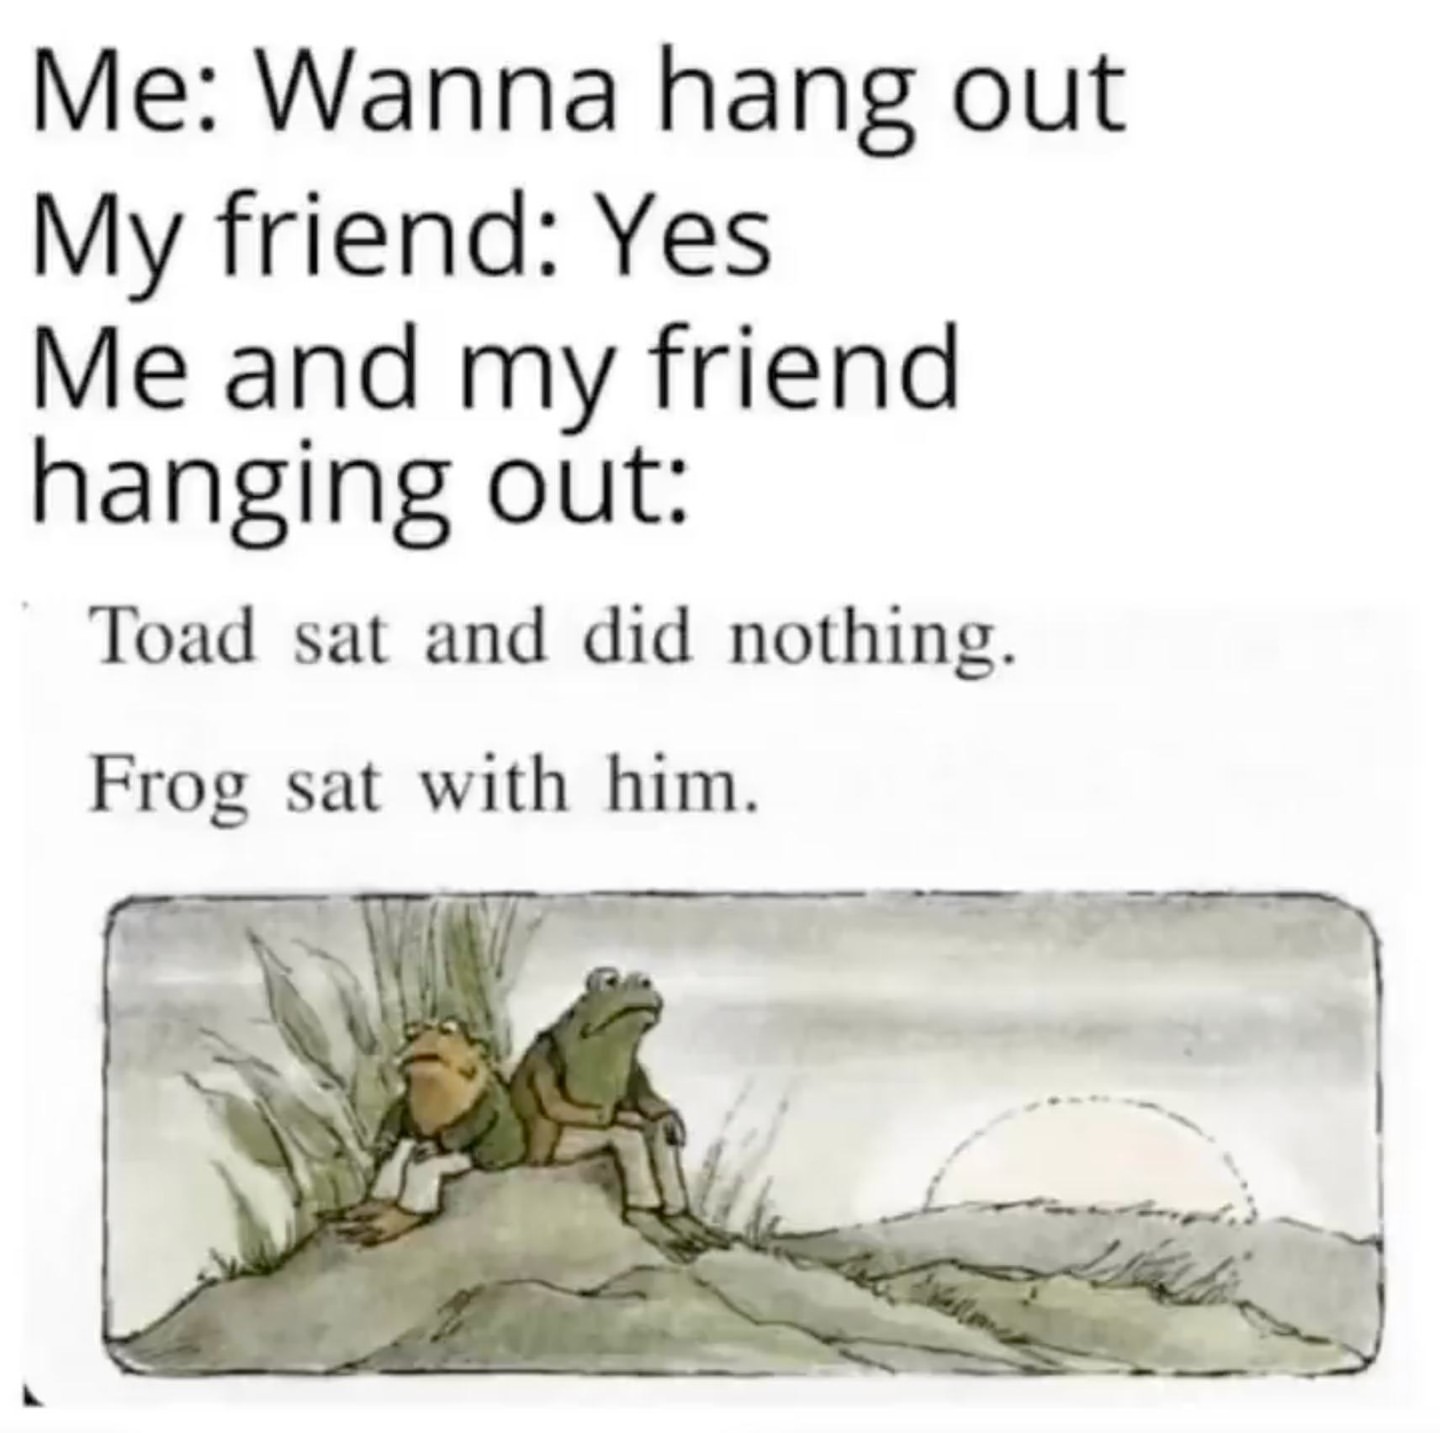 dank memes - funny memes - toad sat and did nothing frog sat - Me Wanna hang out My friend Yes Me and my friend hanging out Toad sat and did nothing. Frog sat with him.